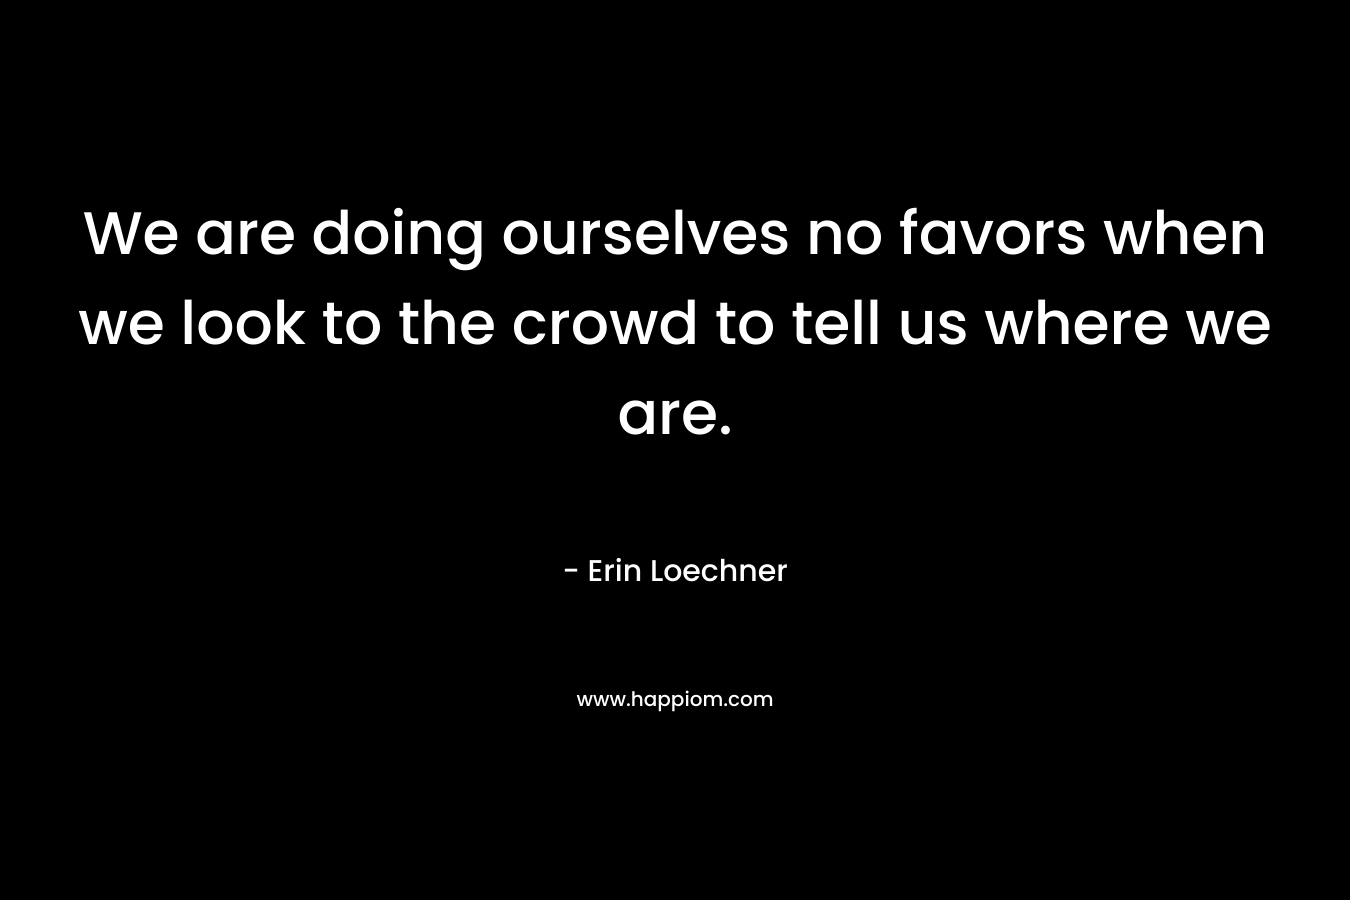 We are doing ourselves no favors when we look to the crowd to tell us where we are. – Erin Loechner